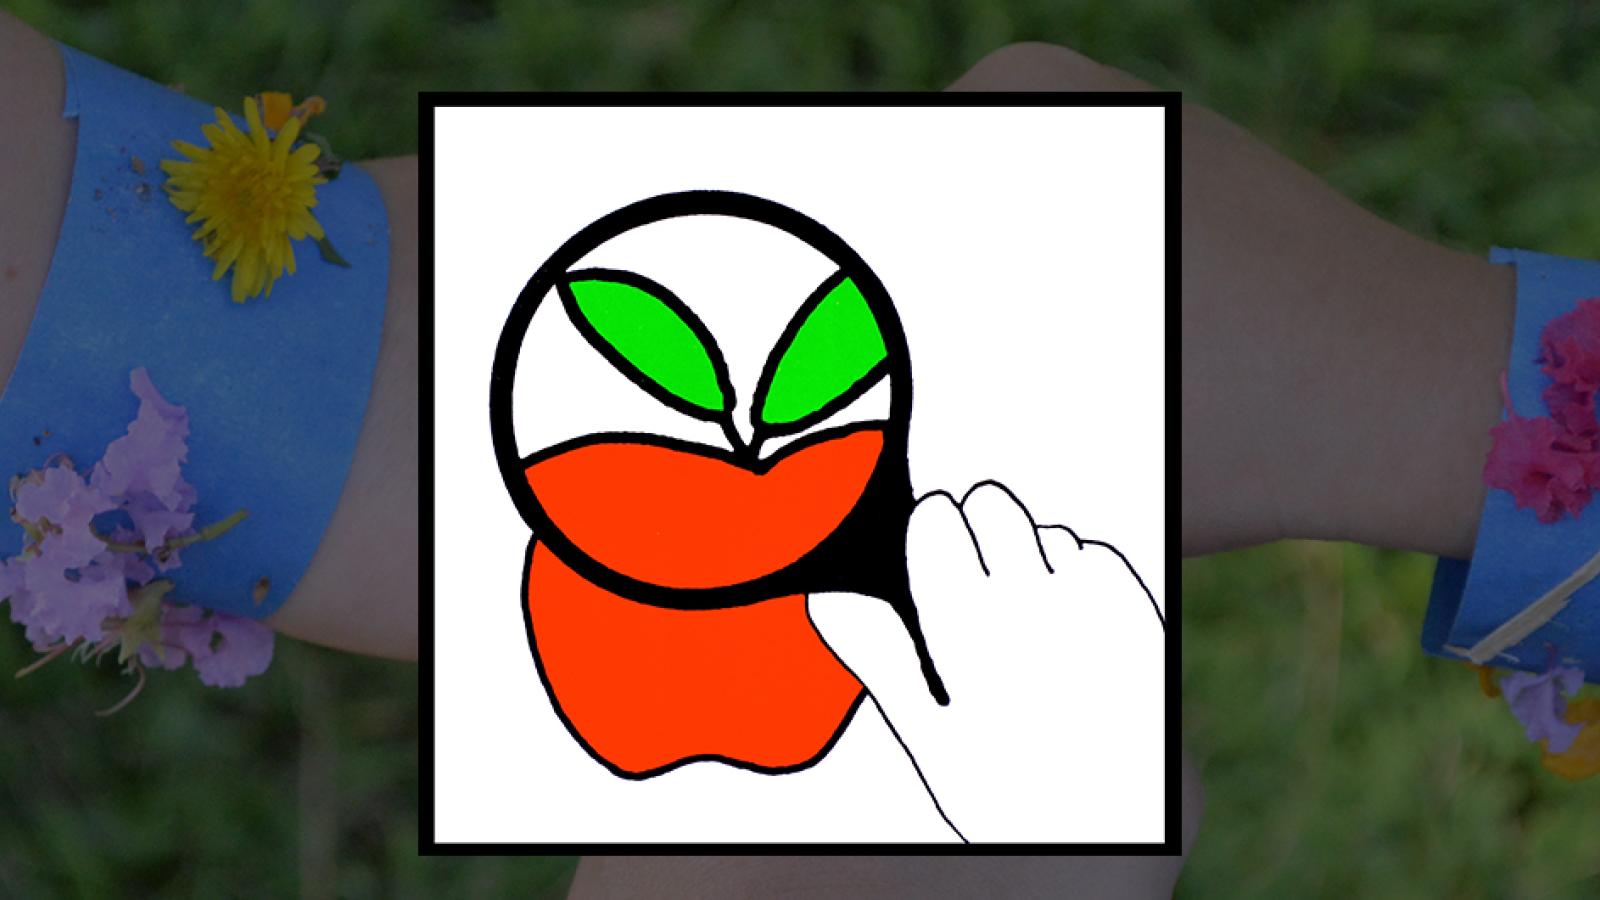 holding a magnifying glass up to an apple